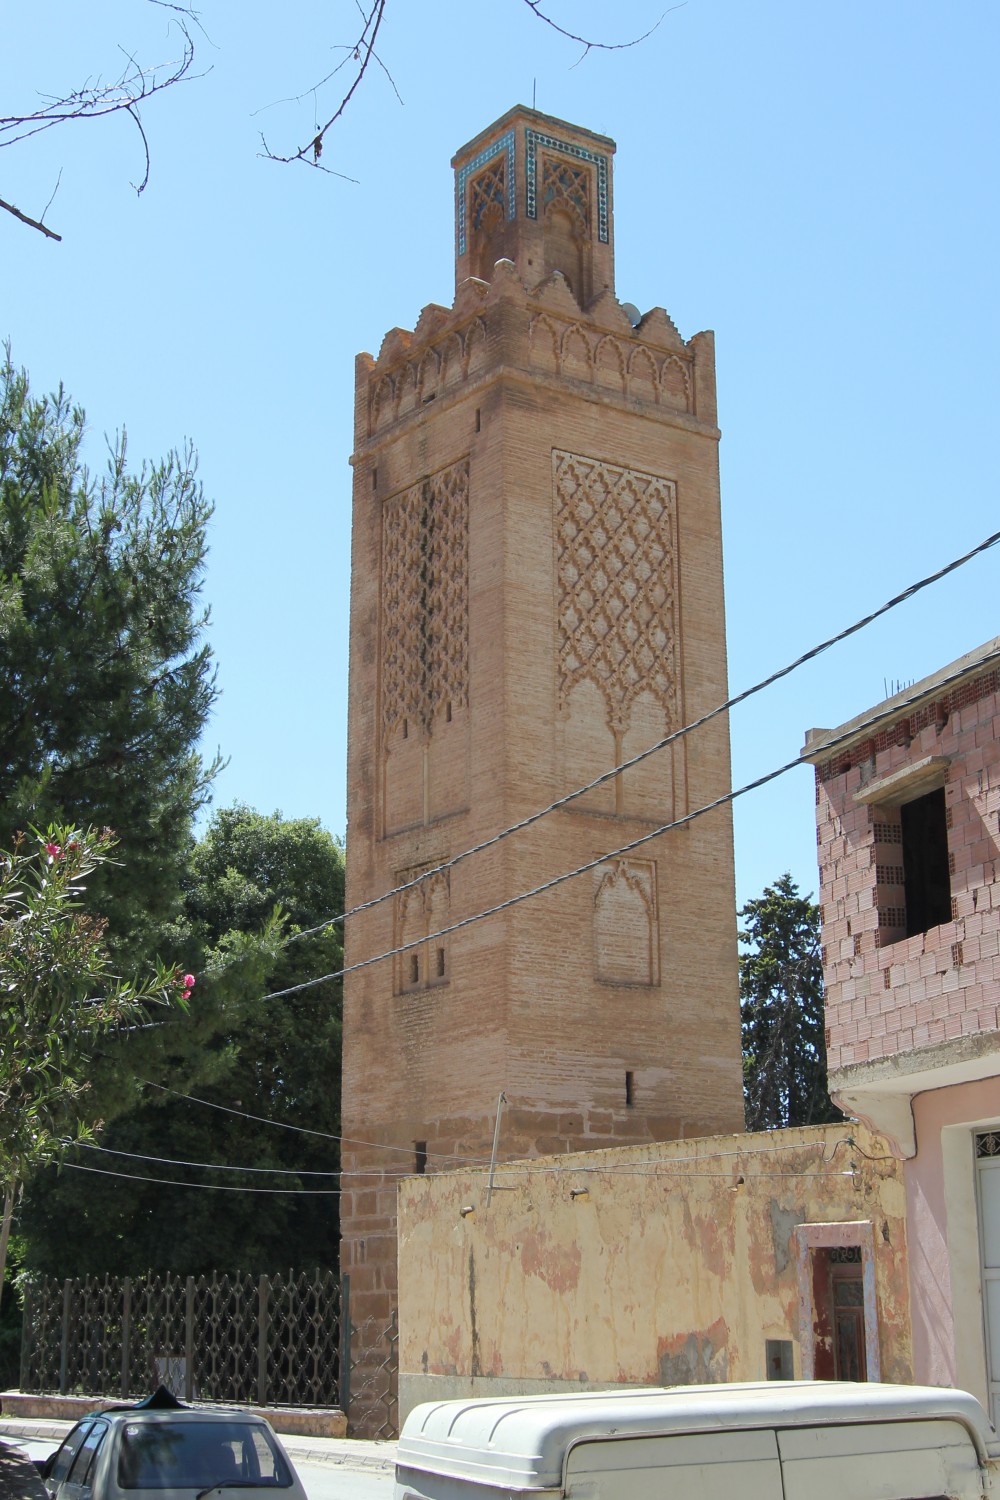 View of the south and east sides of the minaret